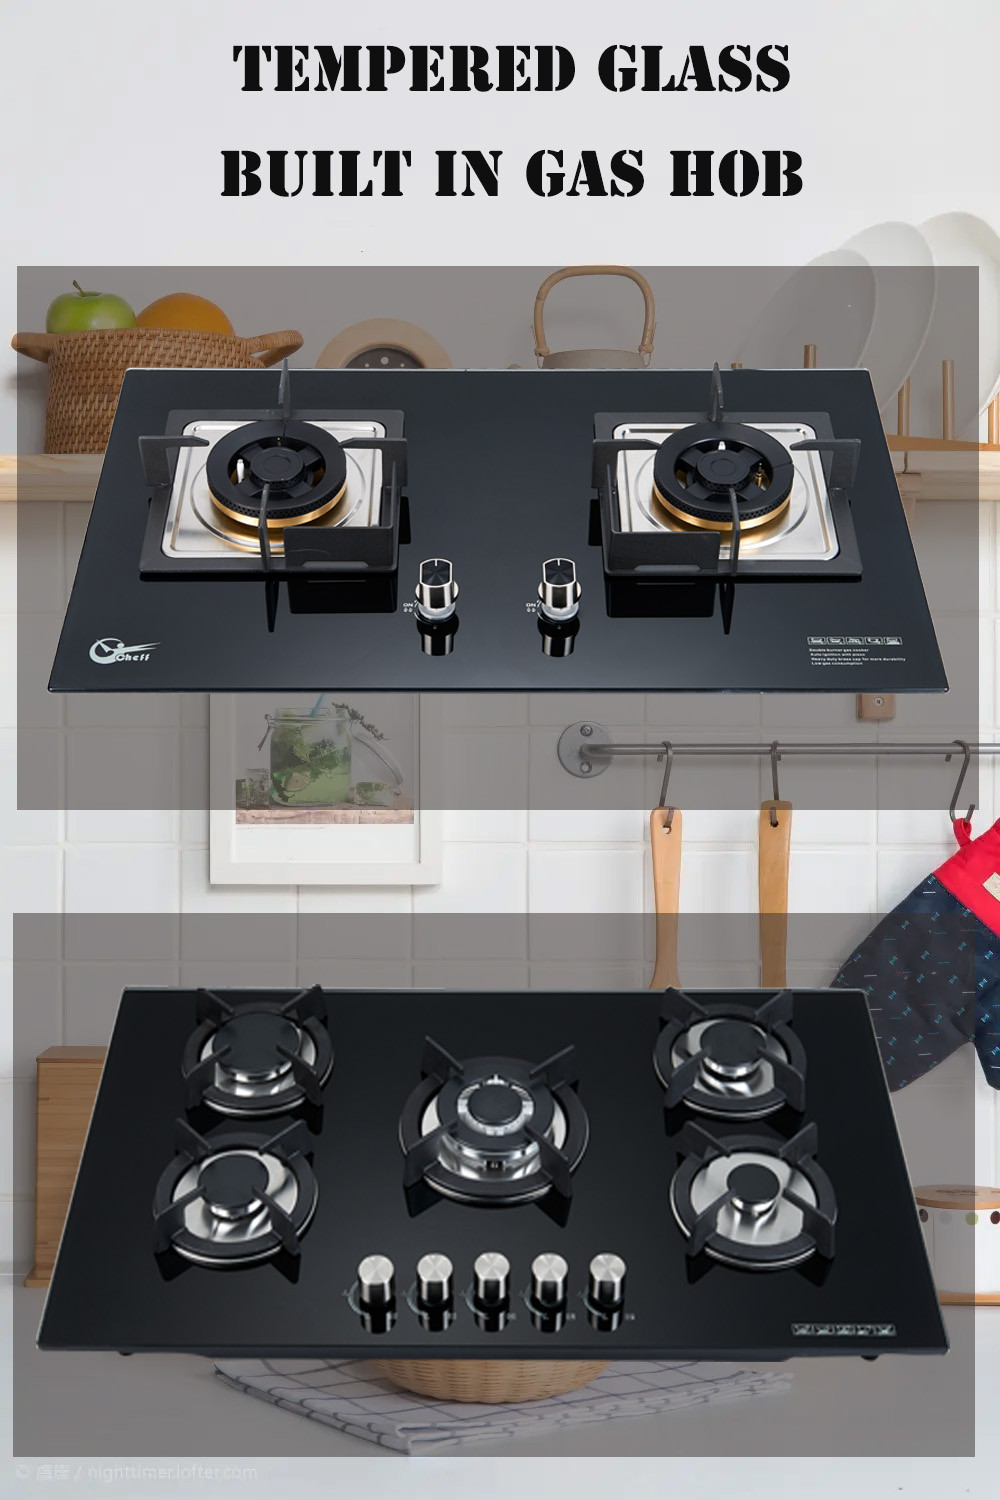 CHEFF Catalog - Tempered Glass Built-in Gas Hob